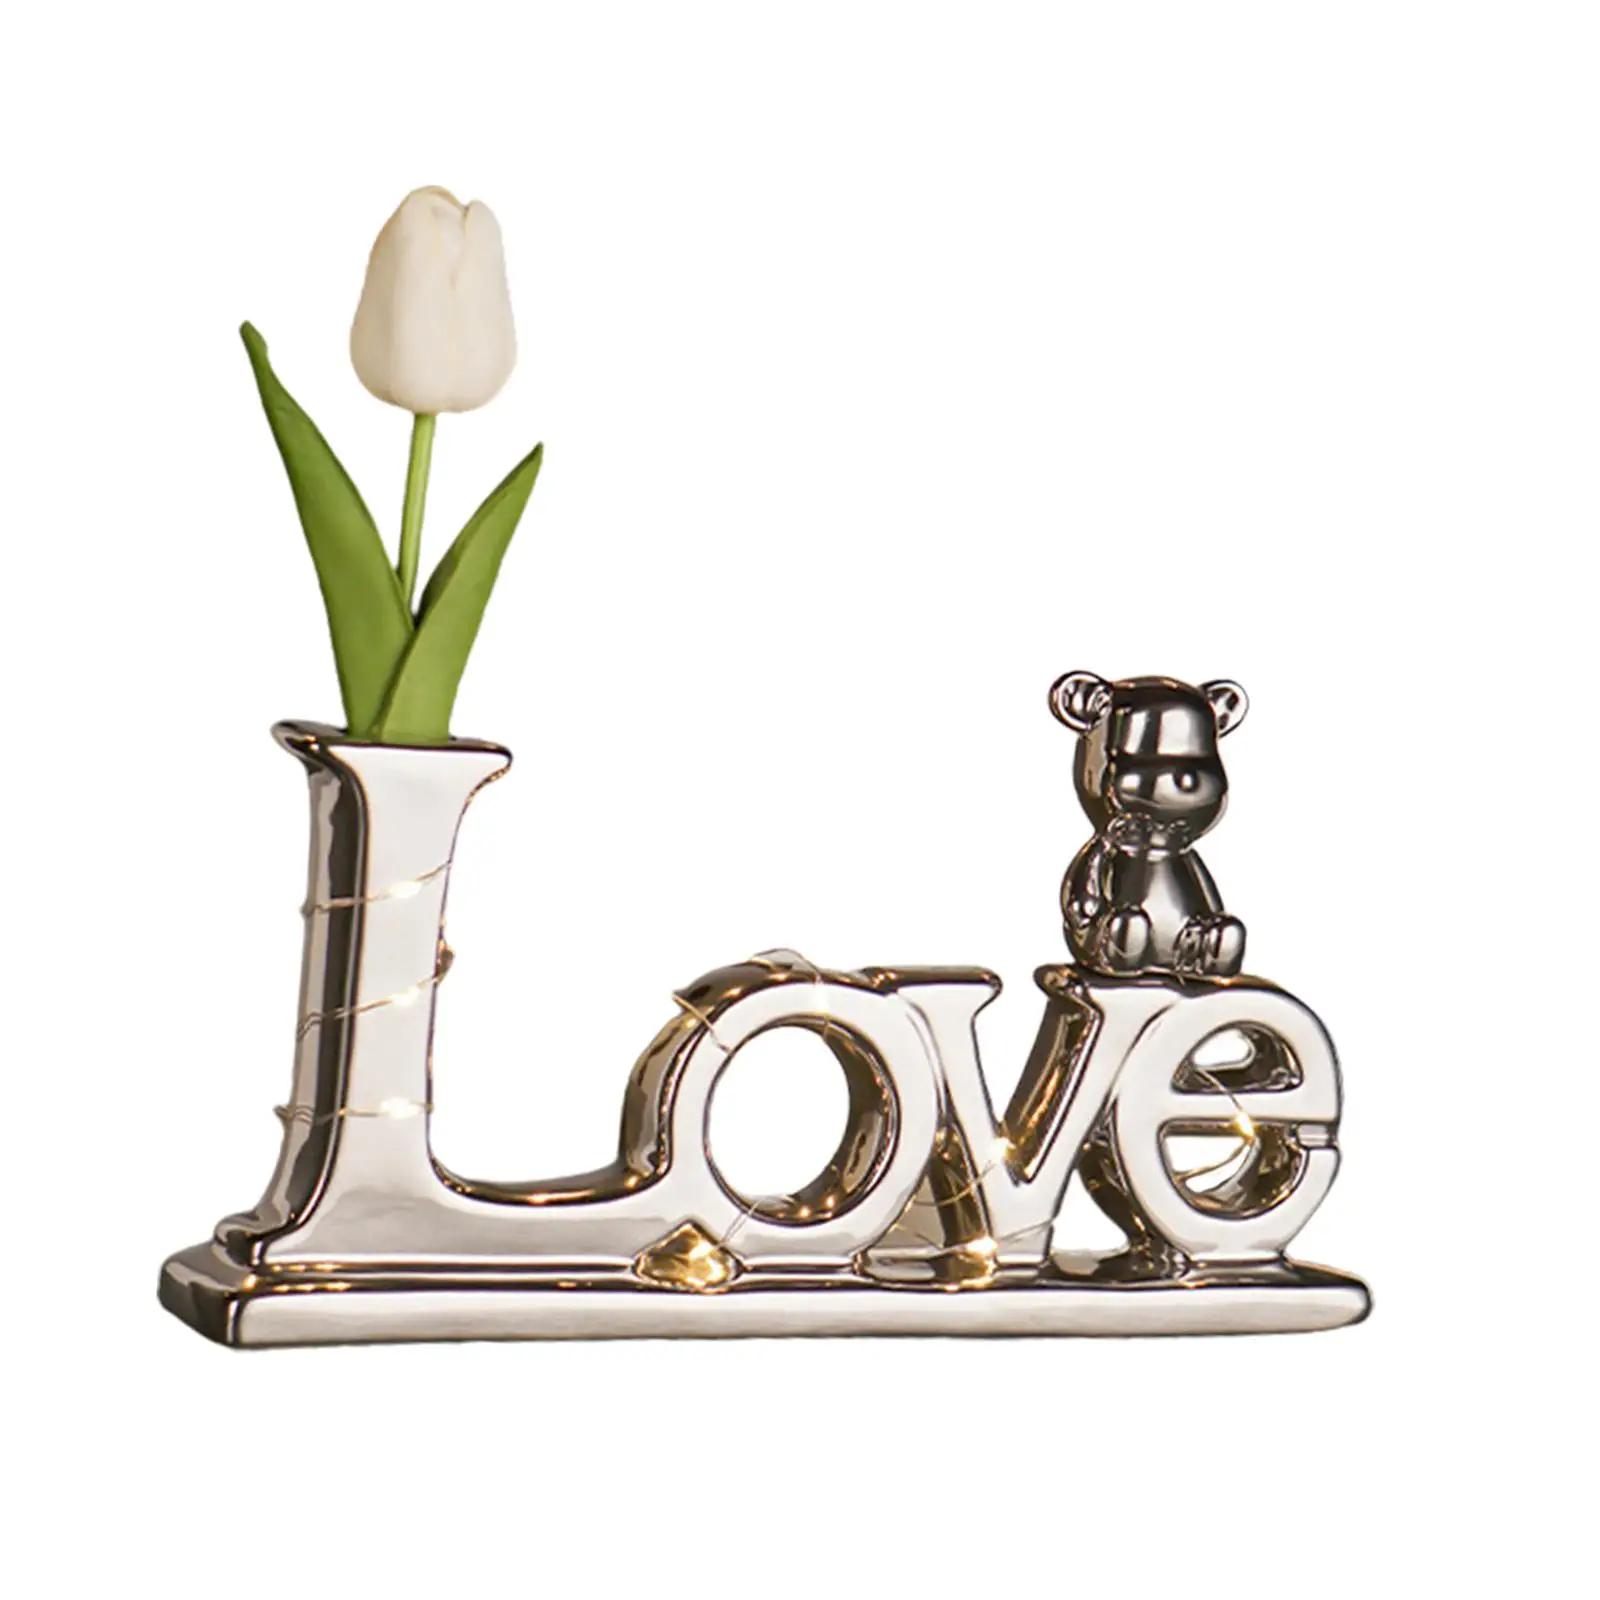 Word Signs for Home Decor Table Ceramic Ornament Freestanding Block Letters Sign for Wedding Cabinet Bedroom Shelf Party